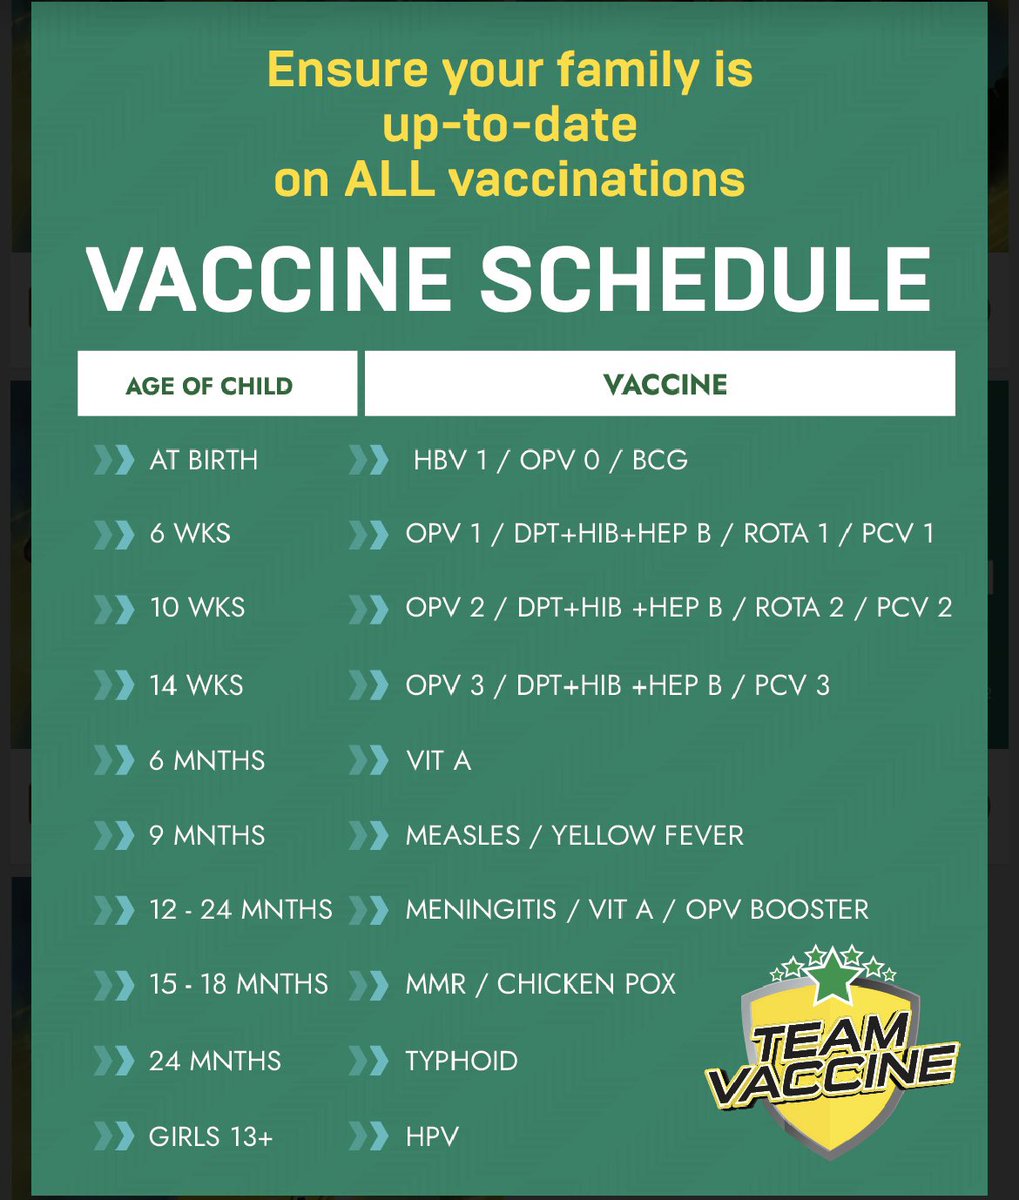 @USAID @Breakthrough_AR @oma_mizflawless @Tinu_AKD @chidemannie @Lawrendozi @ceetynah001 @DavidEdet_ @ZillahWaminaje @Zikarr_ @NphcdaNG @NCDCgov If you are unsure, here’s Nigeria’s routine immunisation schedule. These are the vaccines that you and your loved ones should get, to protect them and those around them Show your passion. Get vaccinated #TeamVaccine @USAID @Breakthrough_AR